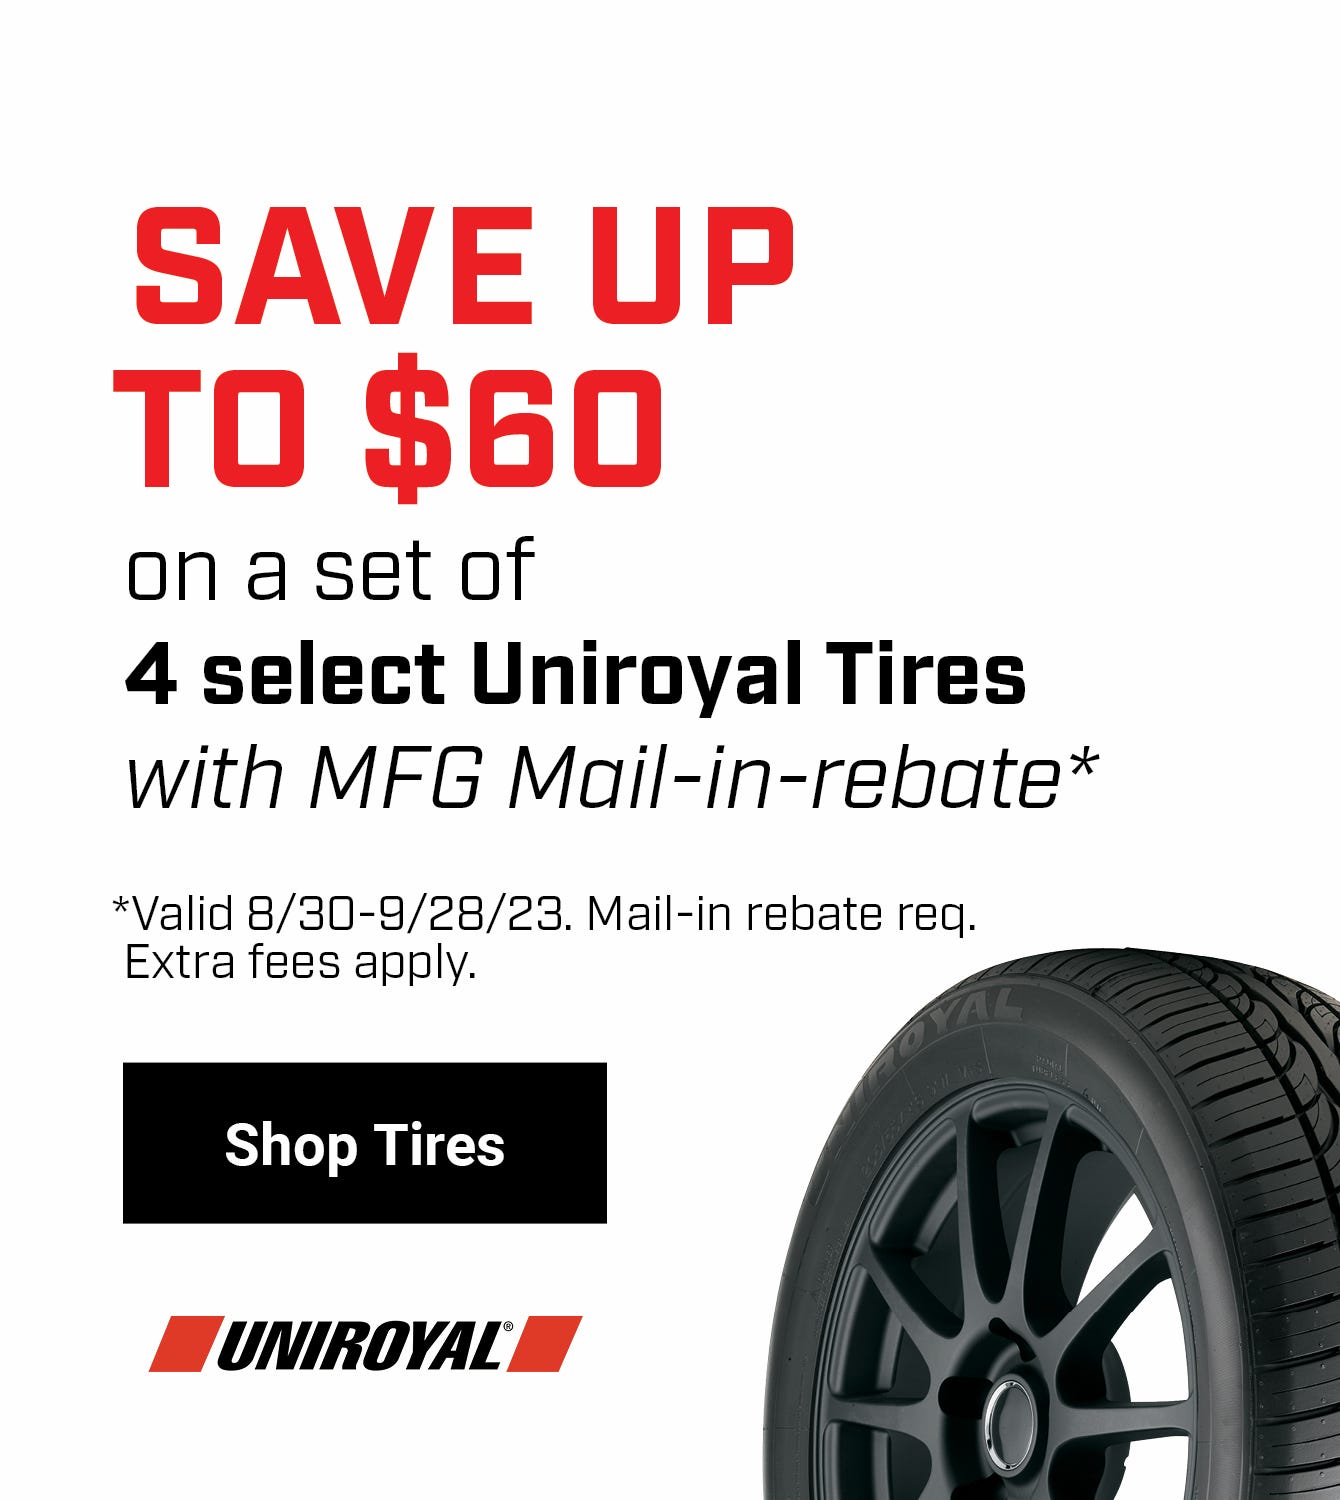 Tire Shop Near Me | New Tires For Cars, Trucks And Suvs